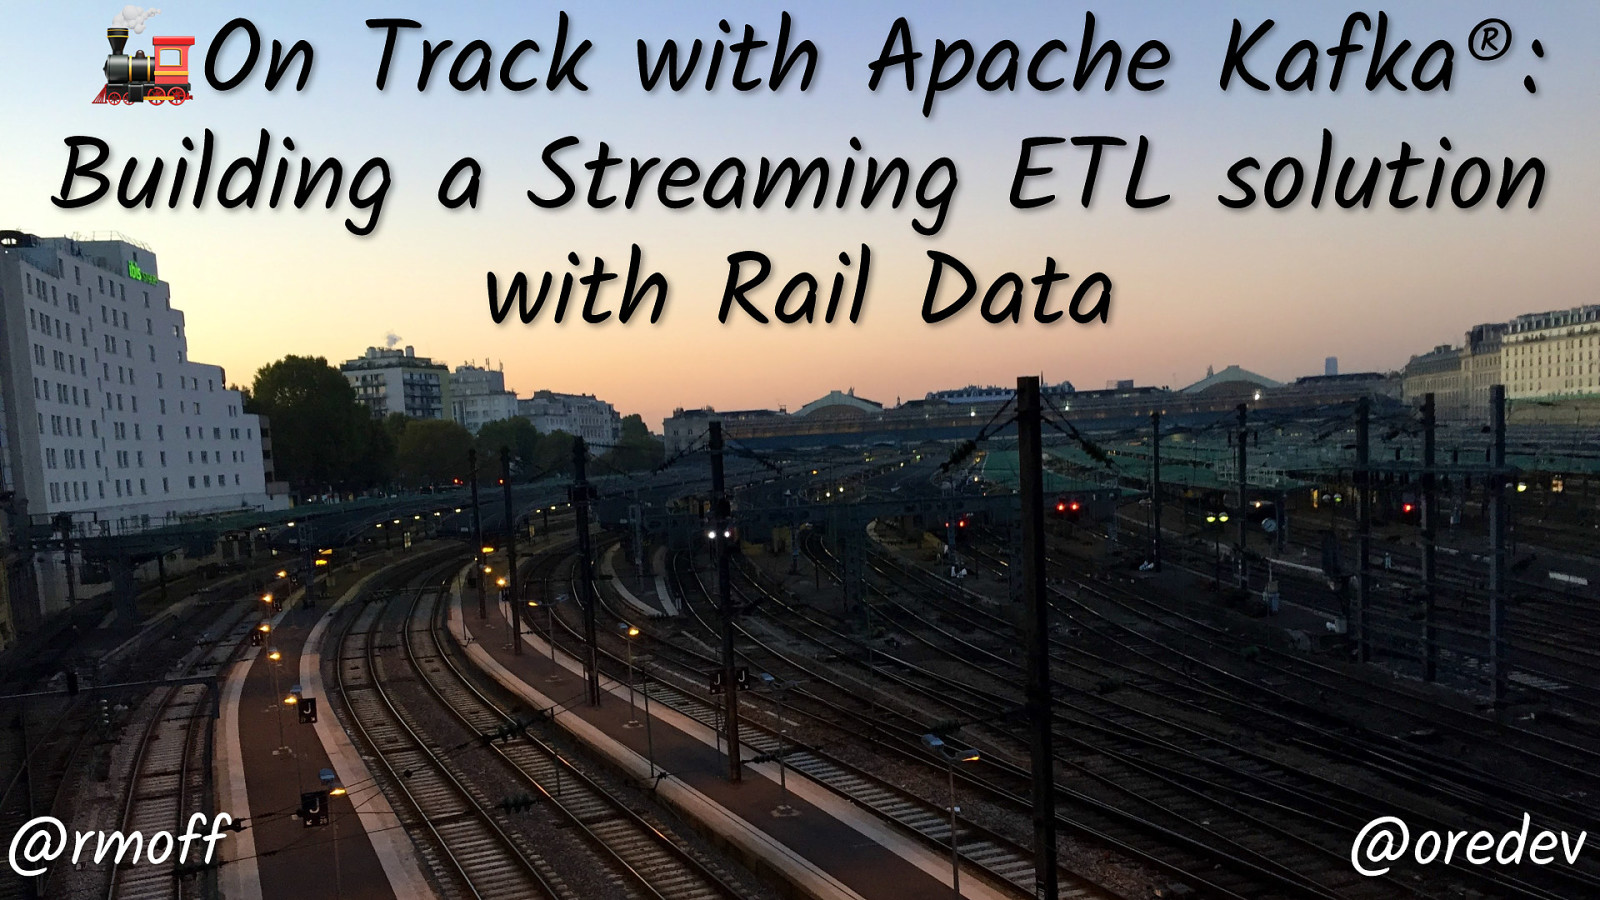 🚂 On Track with Apache Kafka: Building a Streaming ETL solution with Rail Data